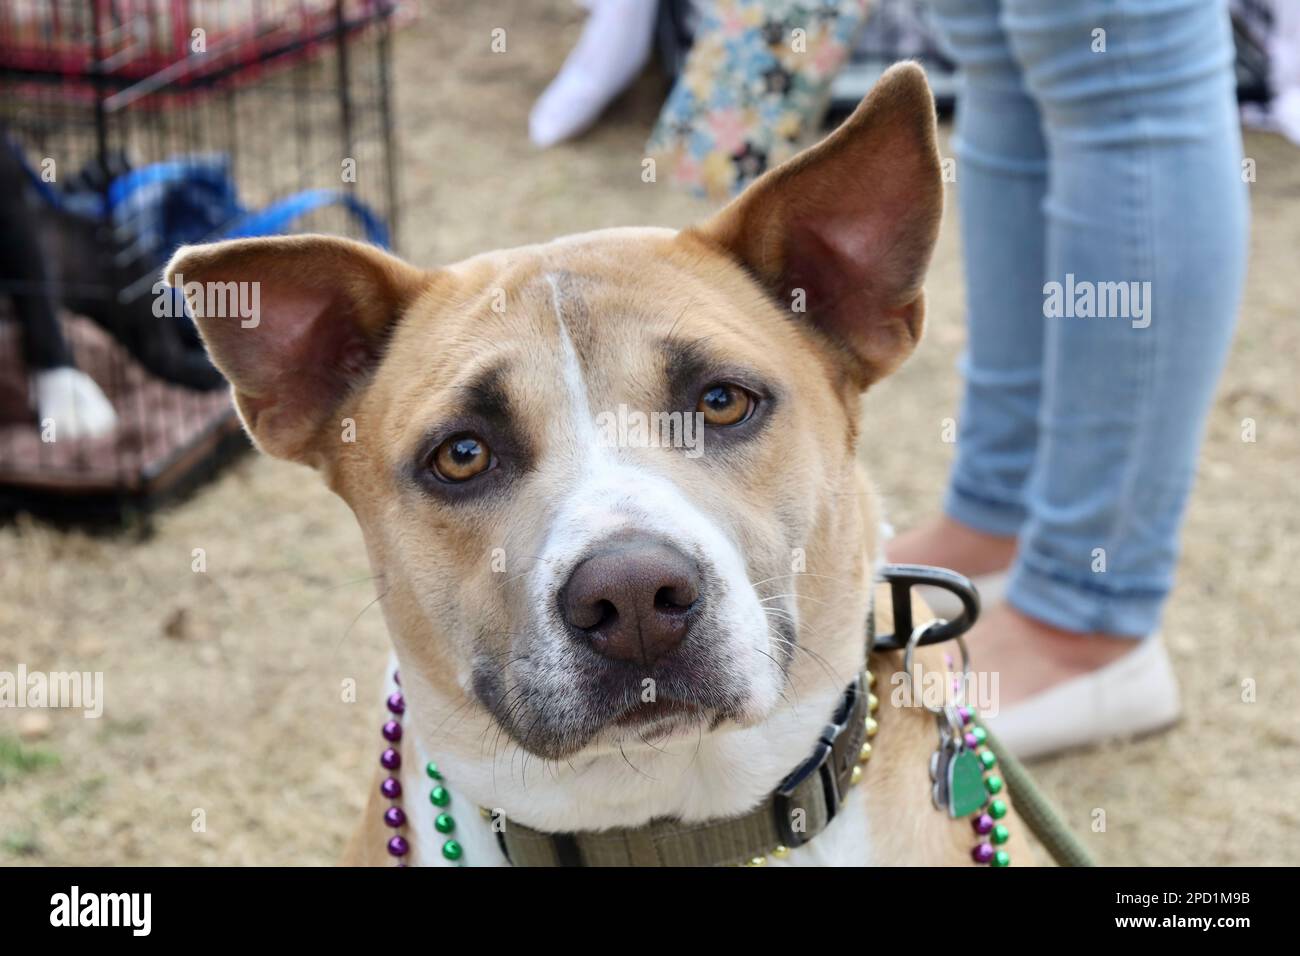 a closeup of an adorable brown and white dog wearing a colorful beaded necklace and stylish collar 2PD1M9B